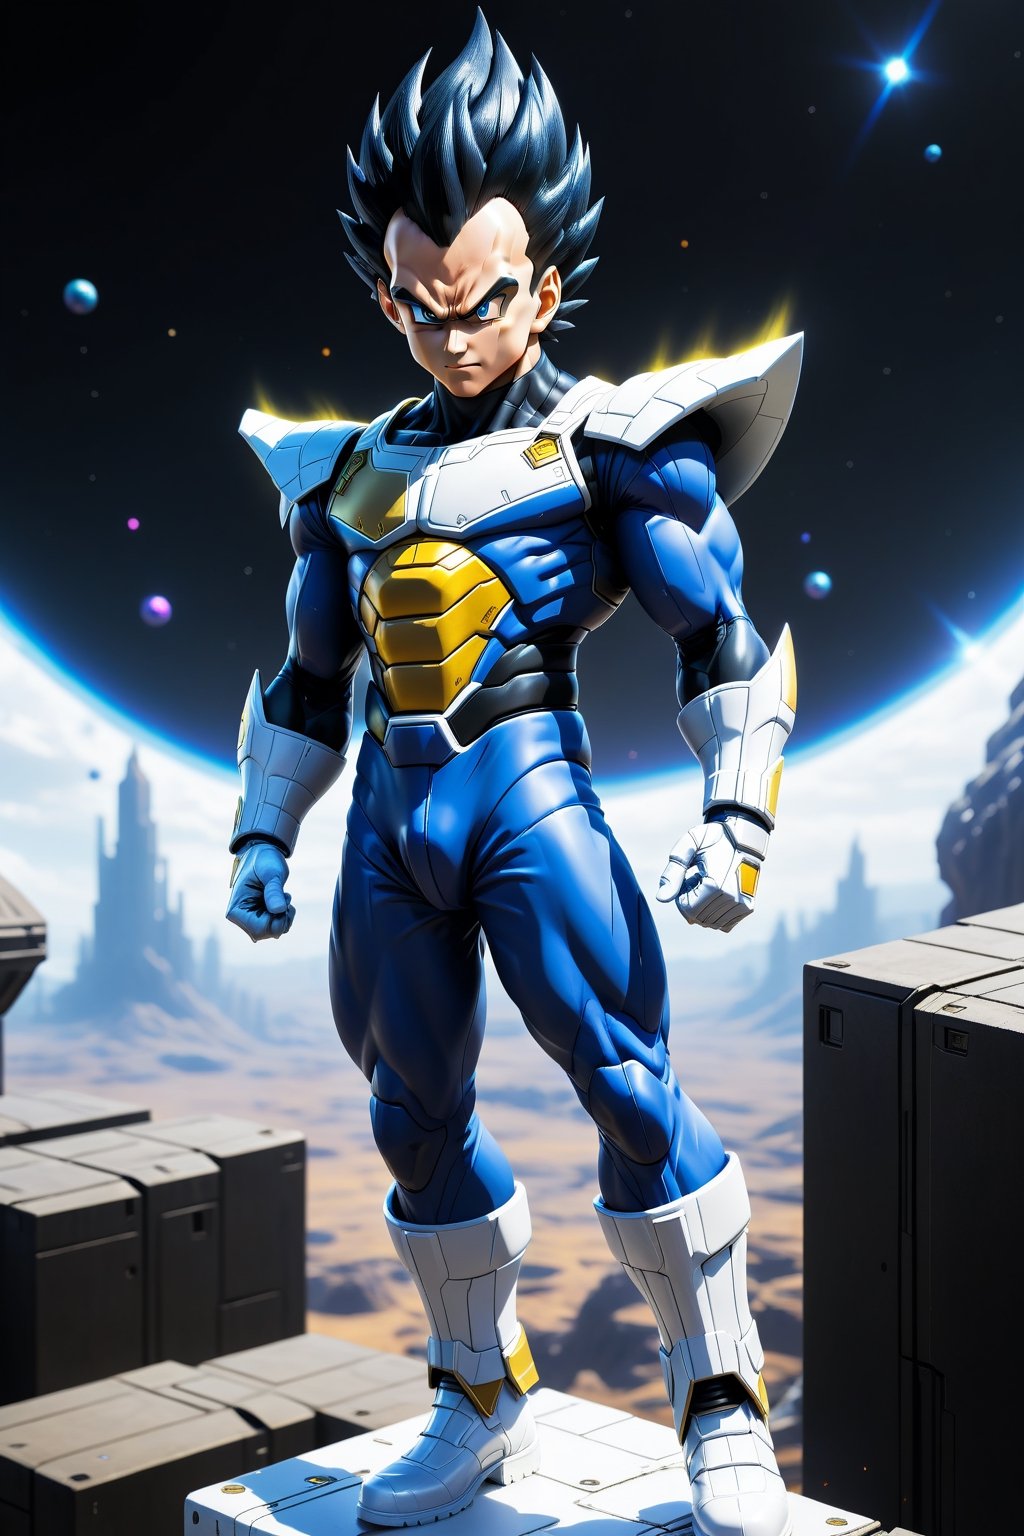 Vegeta from dragon ball with cyber chest armor, in a futuristic planet, flying outspace, no helmet, white and yellow chest, blue pants, white gloves, white boots, evil, jumping, black hair,cyber_armor,cyberpunk style